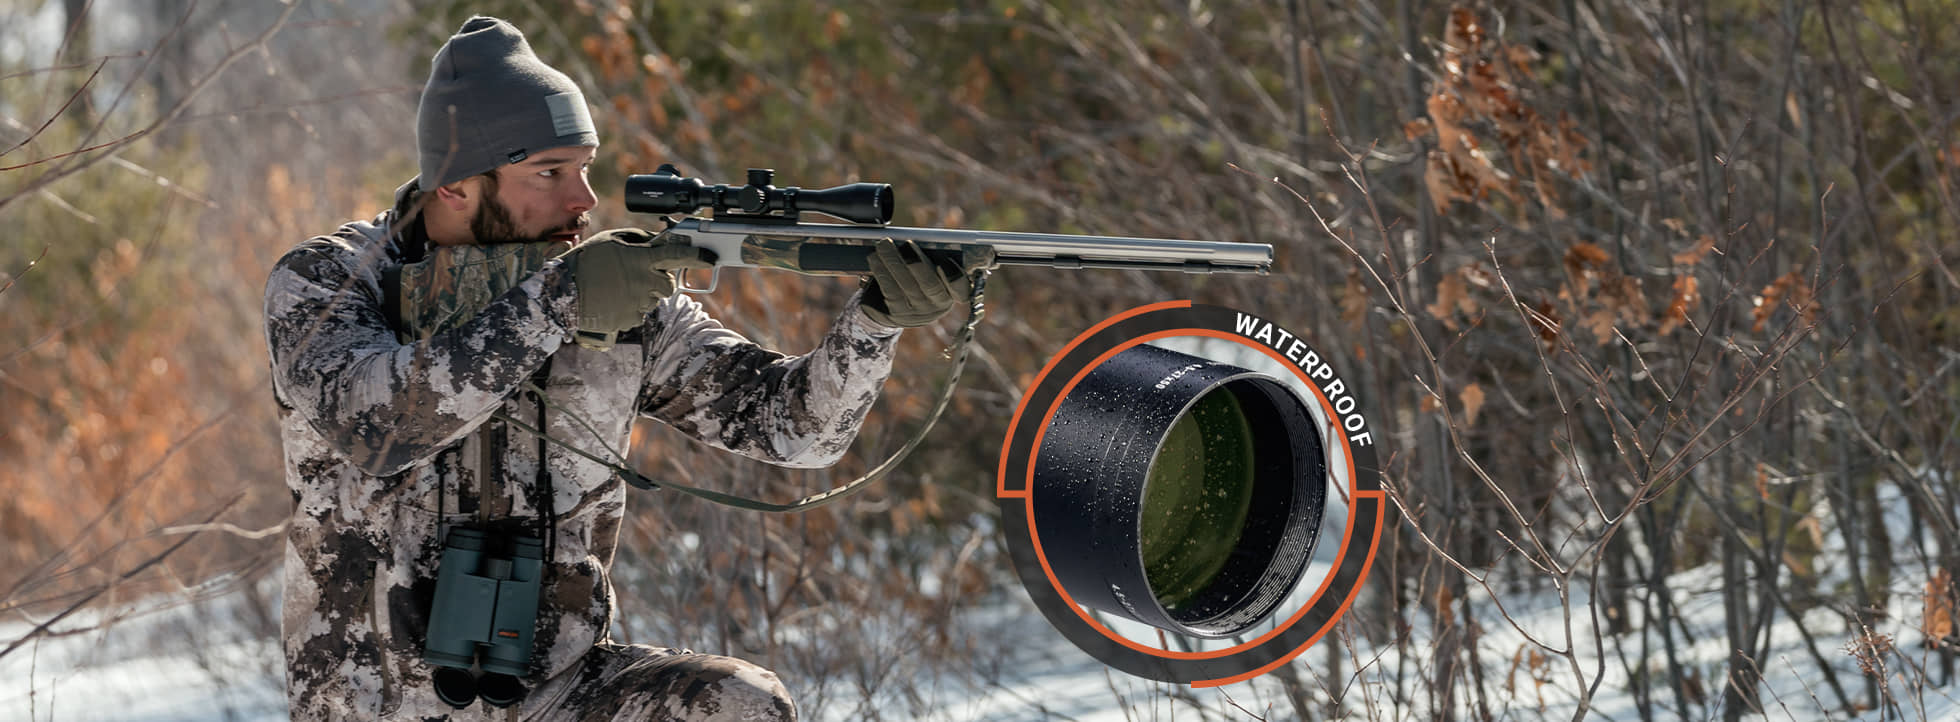 Are you a hunter on a budget looking for a great hunting rifle scope for this upcoming season? The Neos scopes are the perfect hunting rifle scopes for hunters that want quality and features all while staying on budget.